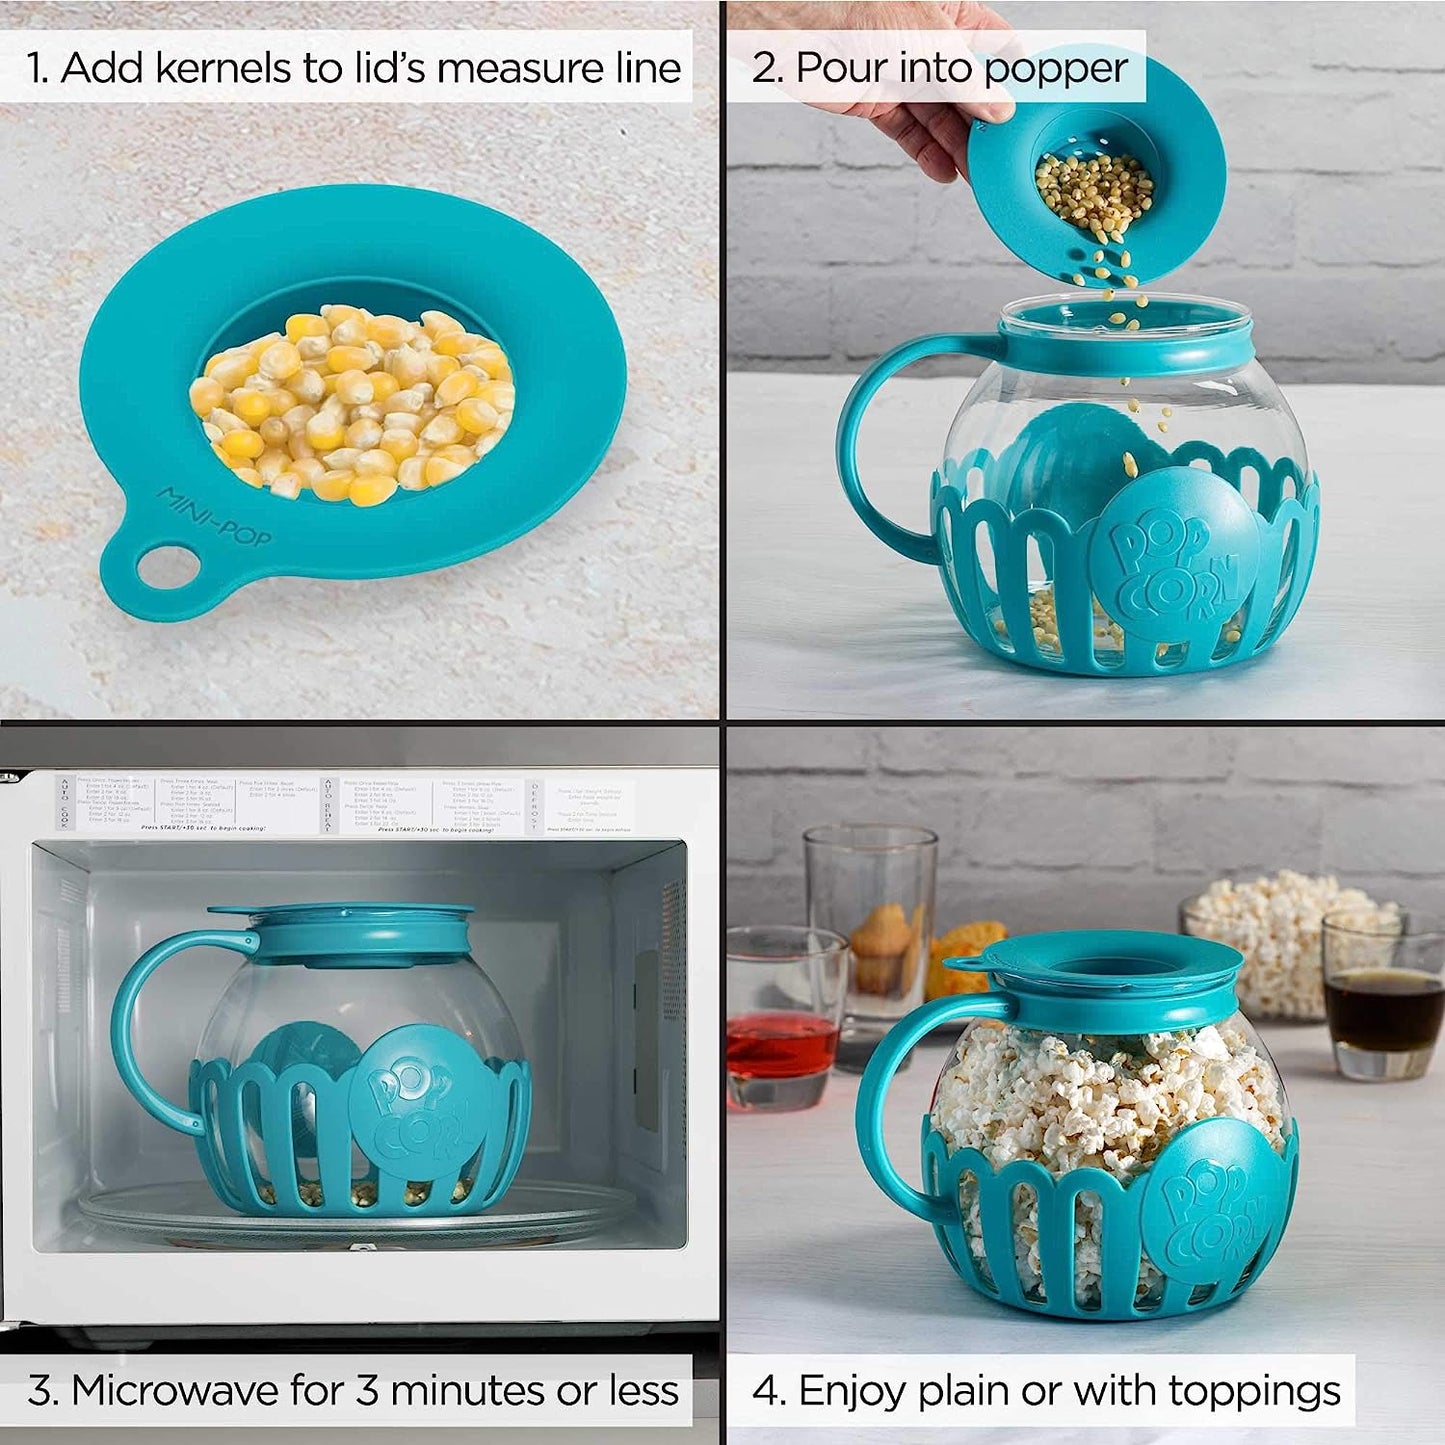 Superior Micro-Pop Microwave Popcorn Popper with Temperature Safe Glass, 3-in-1 Lid Measures Kernels and Melts Butter, Made Without BPA, Dishwasher Safe, 3-Quart, Red